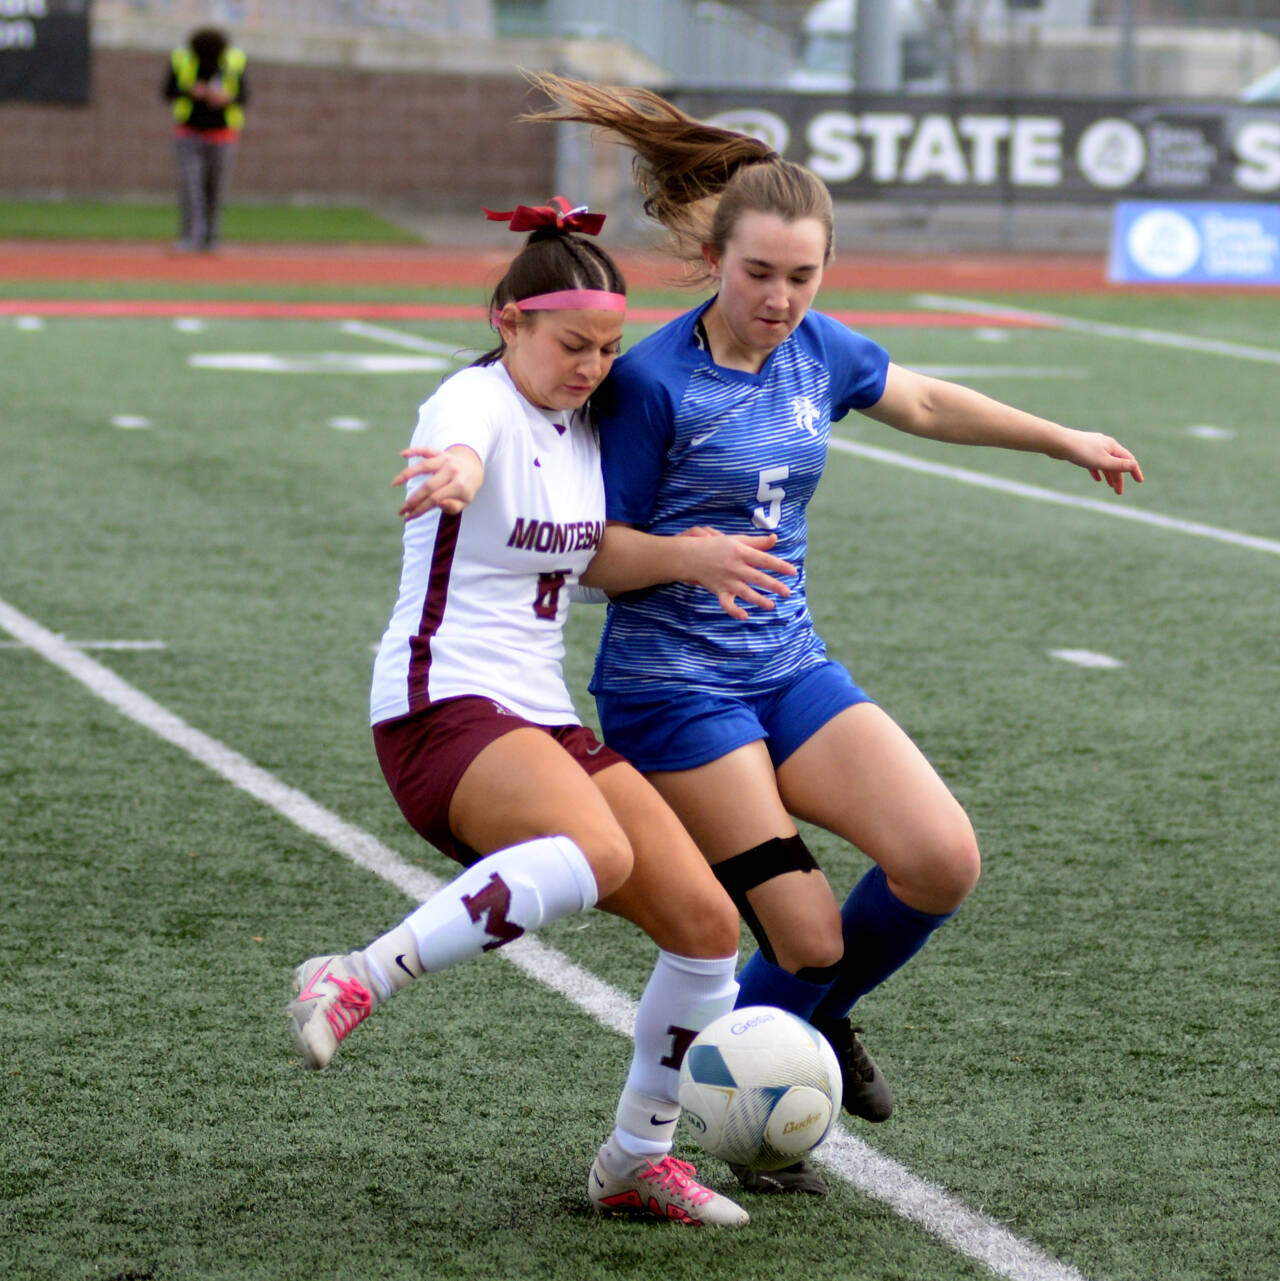 RYAN SPARKS | THE DAILY WORLD Montesano junior forward Adda Potts (8) shadows La Center senior midfielder Shaela Bradley during the Bulldogs’ 3-1 win over La Center in the 1A State third/fourth-place game on Saturday in Tacoma.